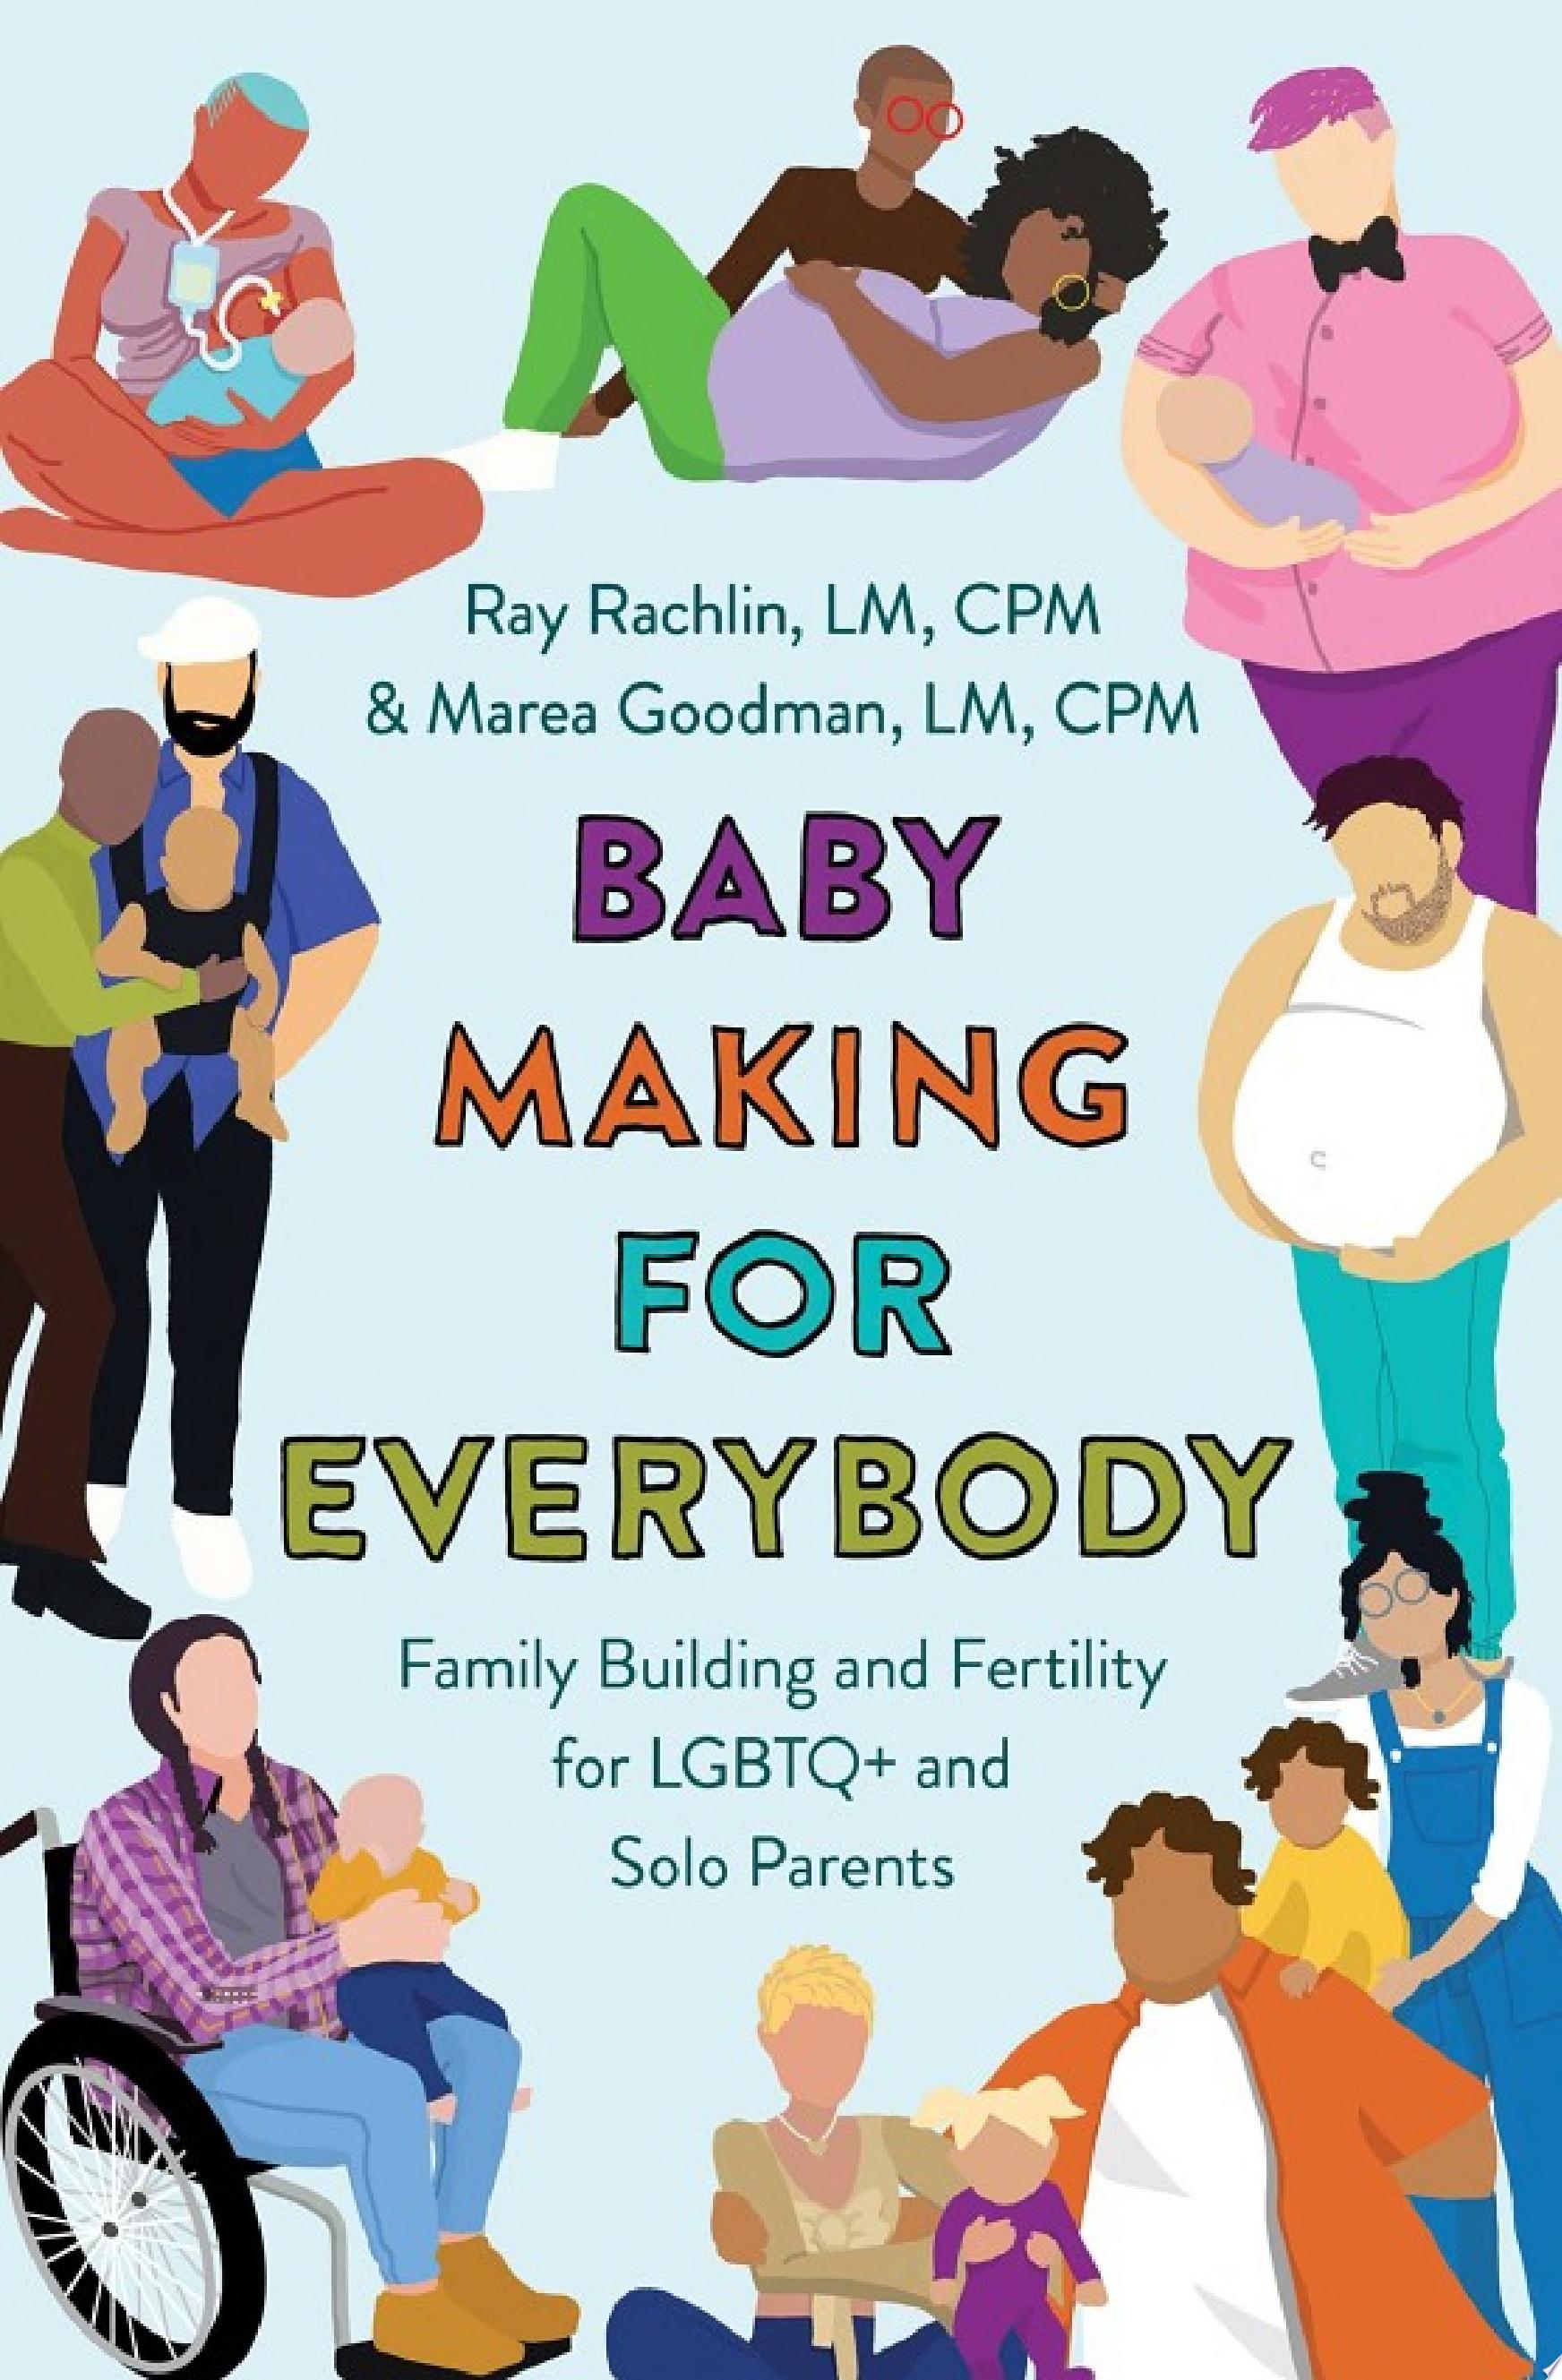 Image for "Baby Making for Everybody"